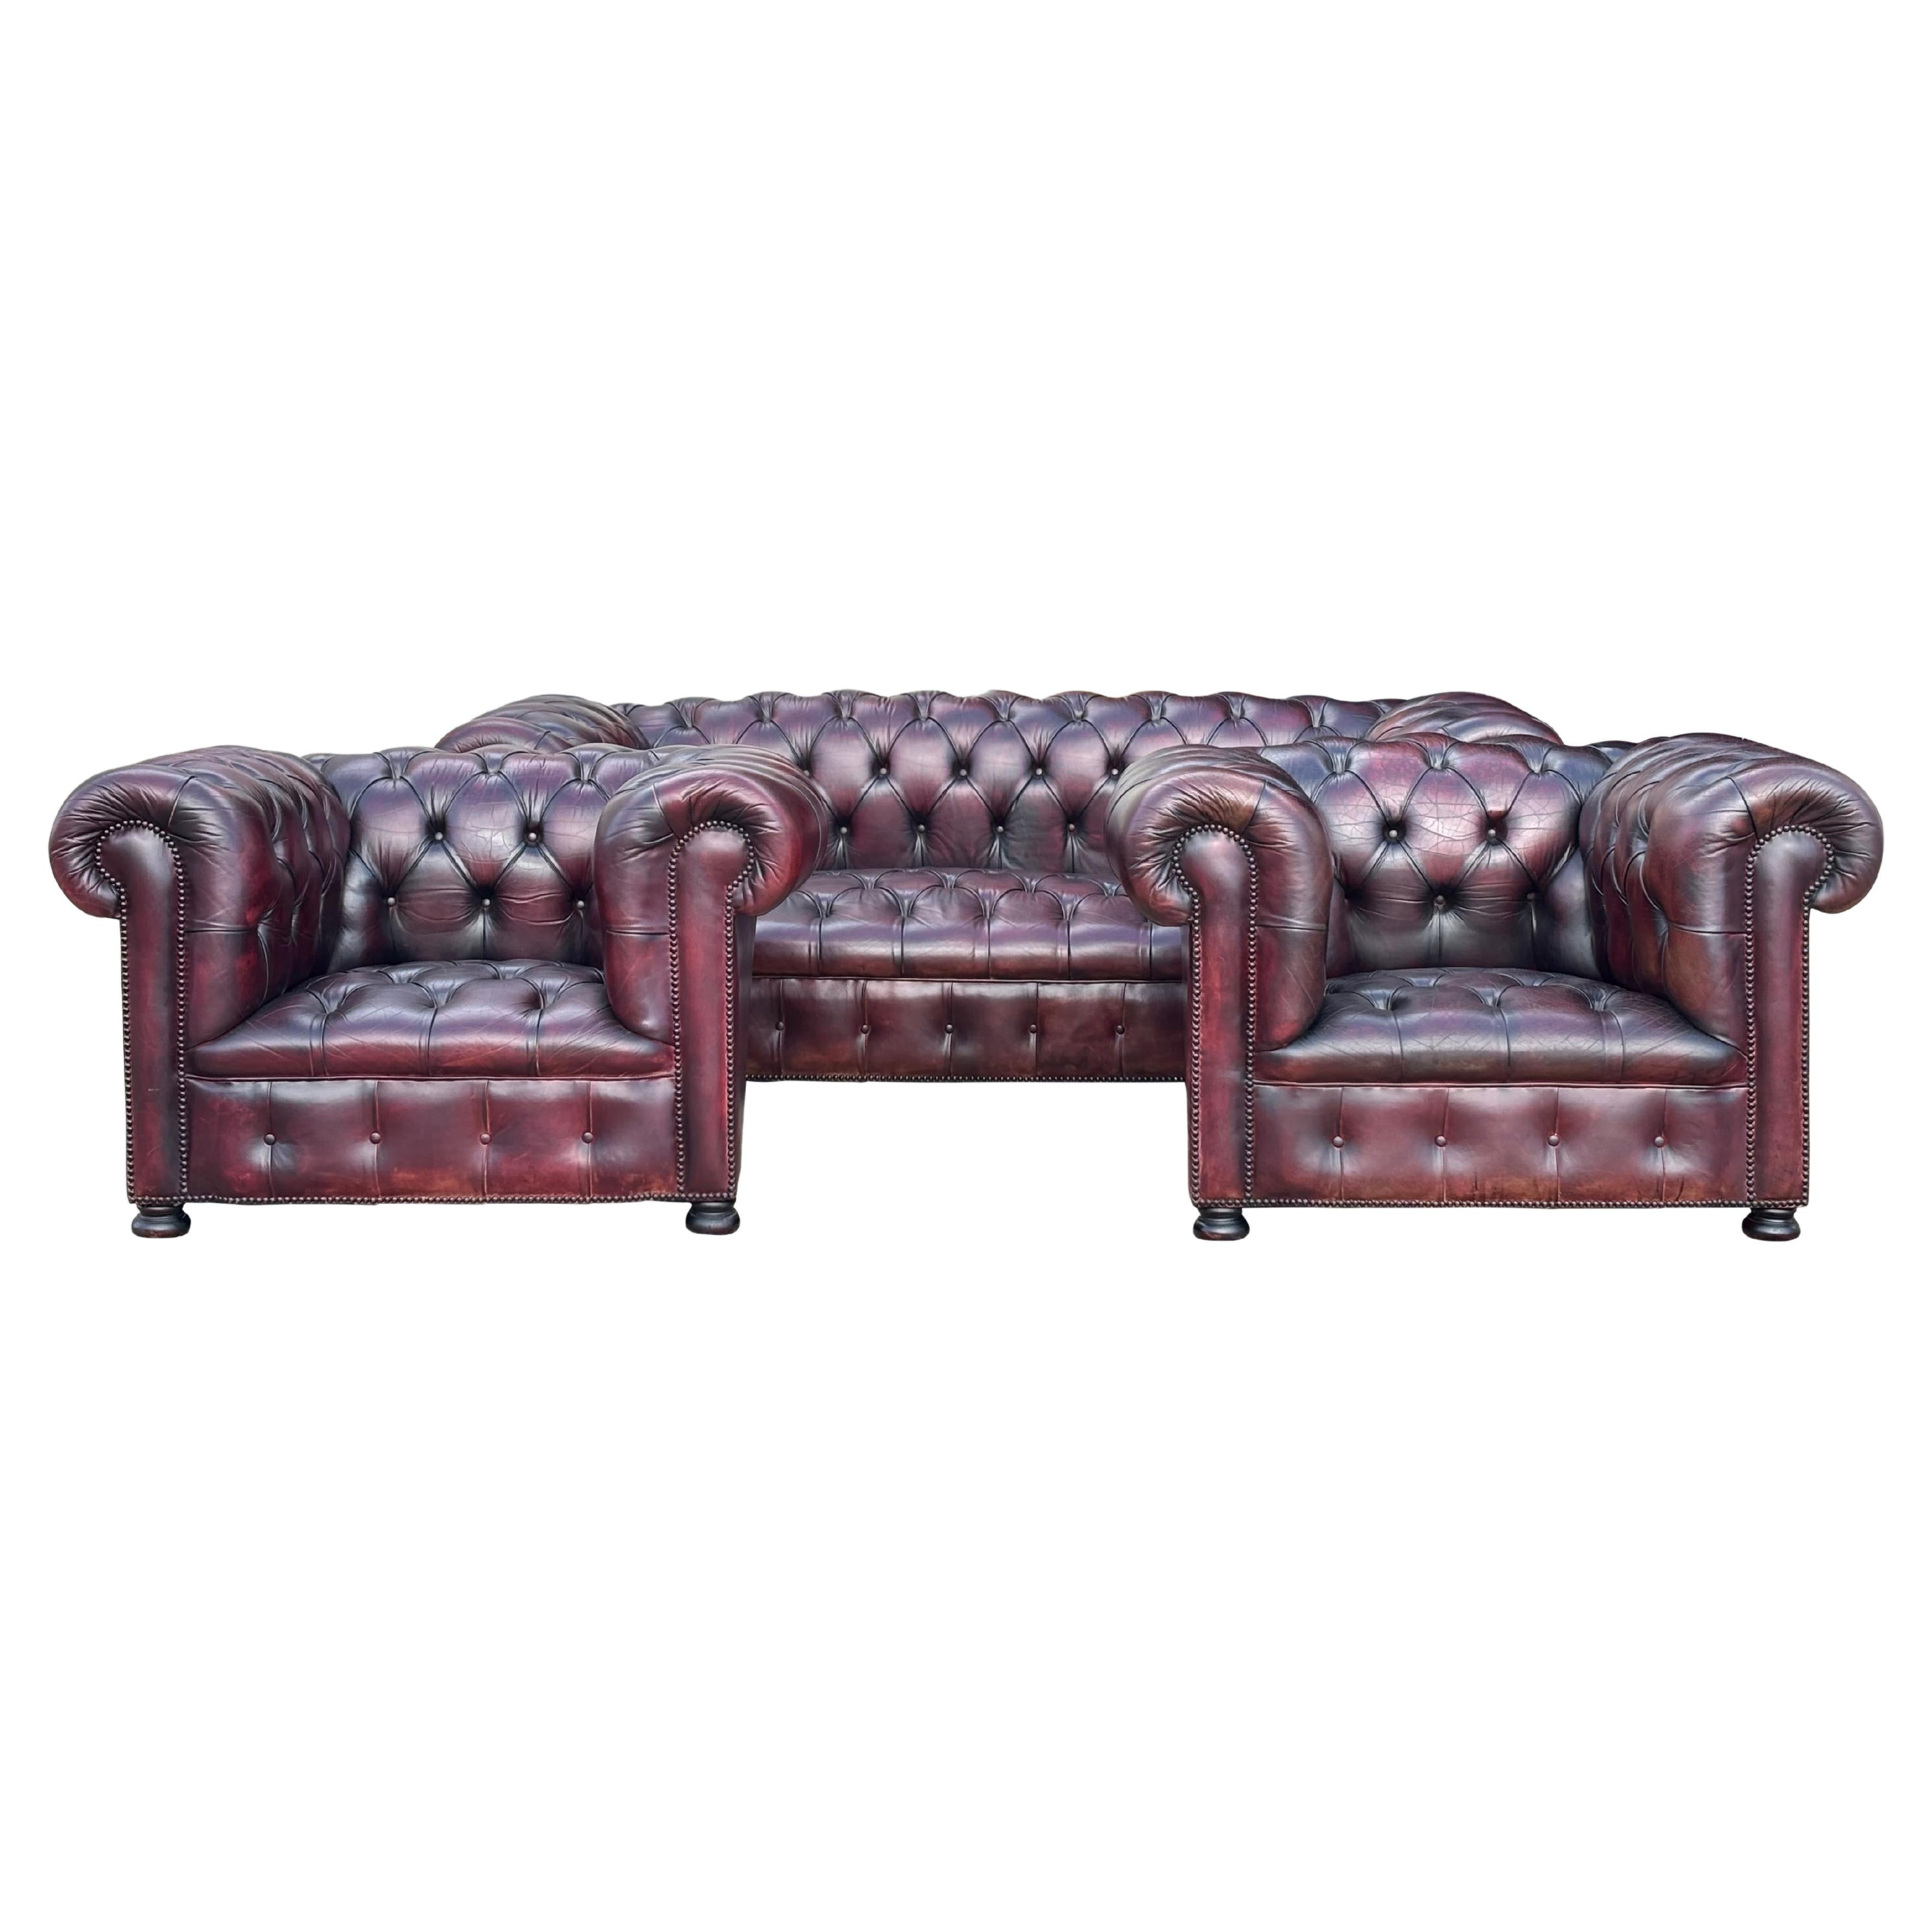 Stunning Three Piece Burgundy Leather Chesterfield Suite For Sale